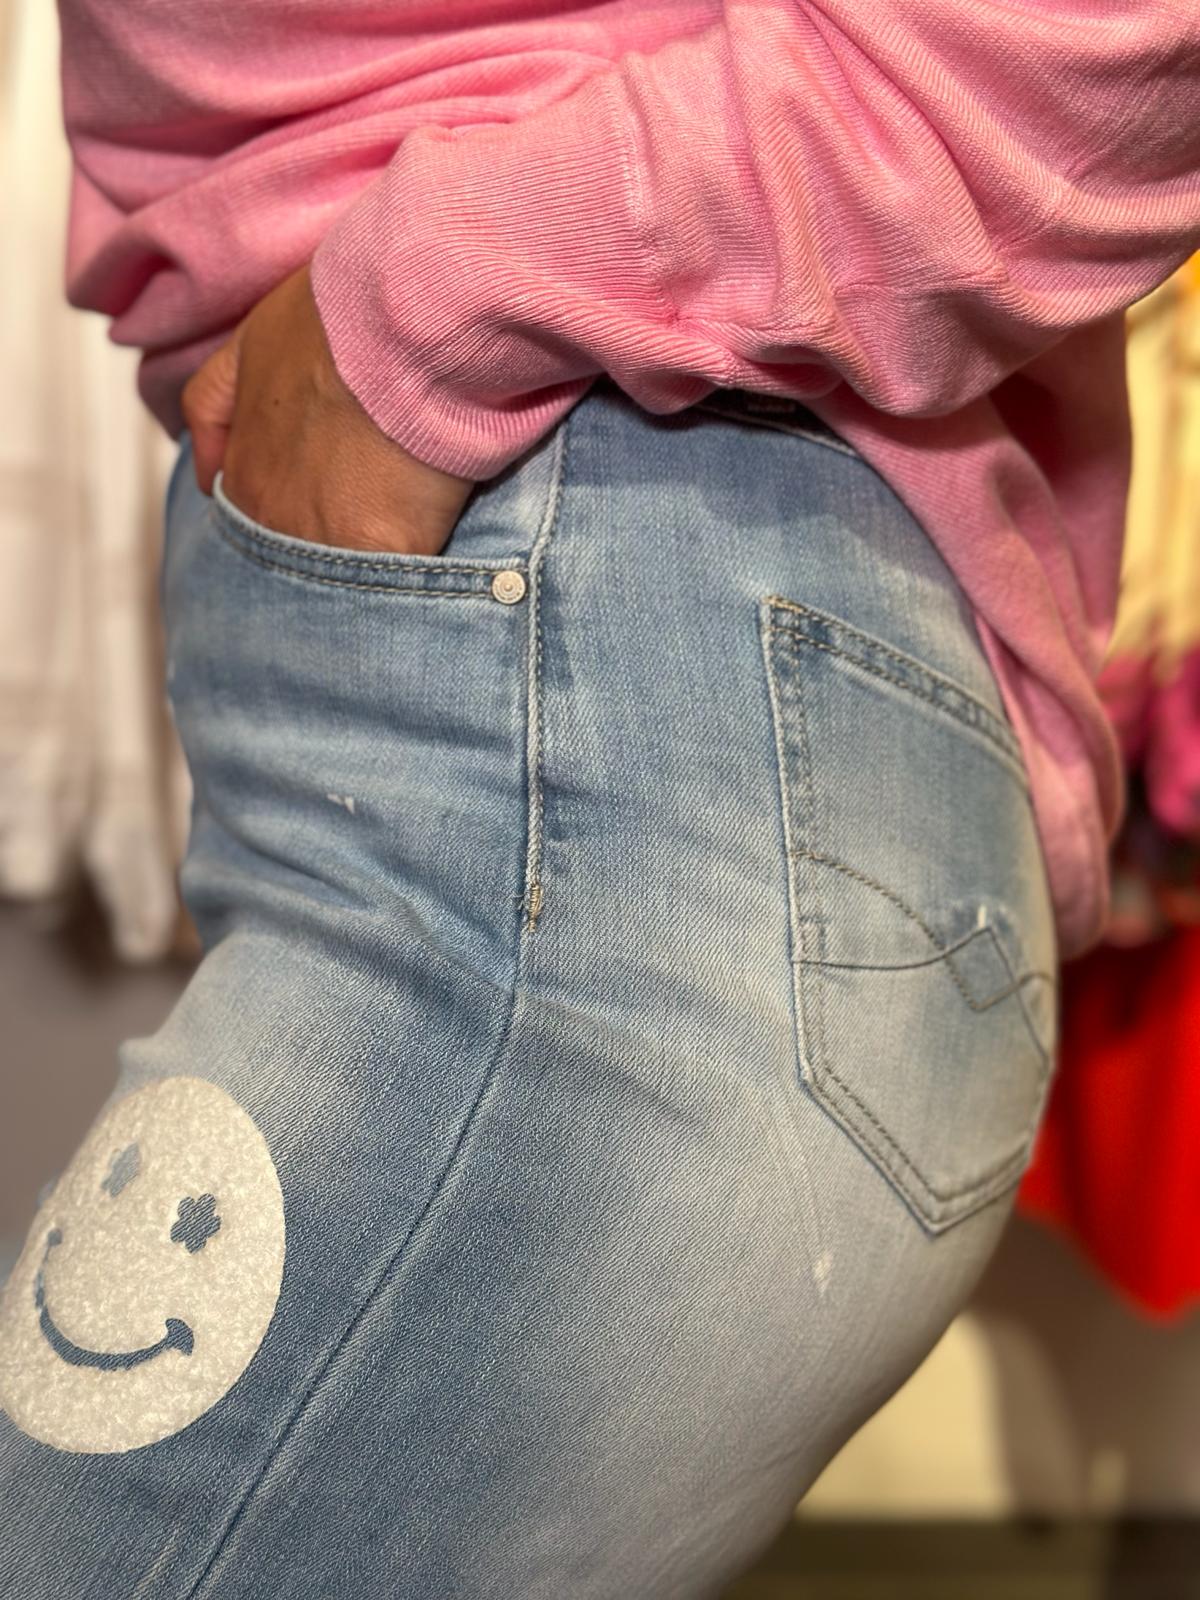 Mega nice "SMILEY" Jeans in "heller" Waschung